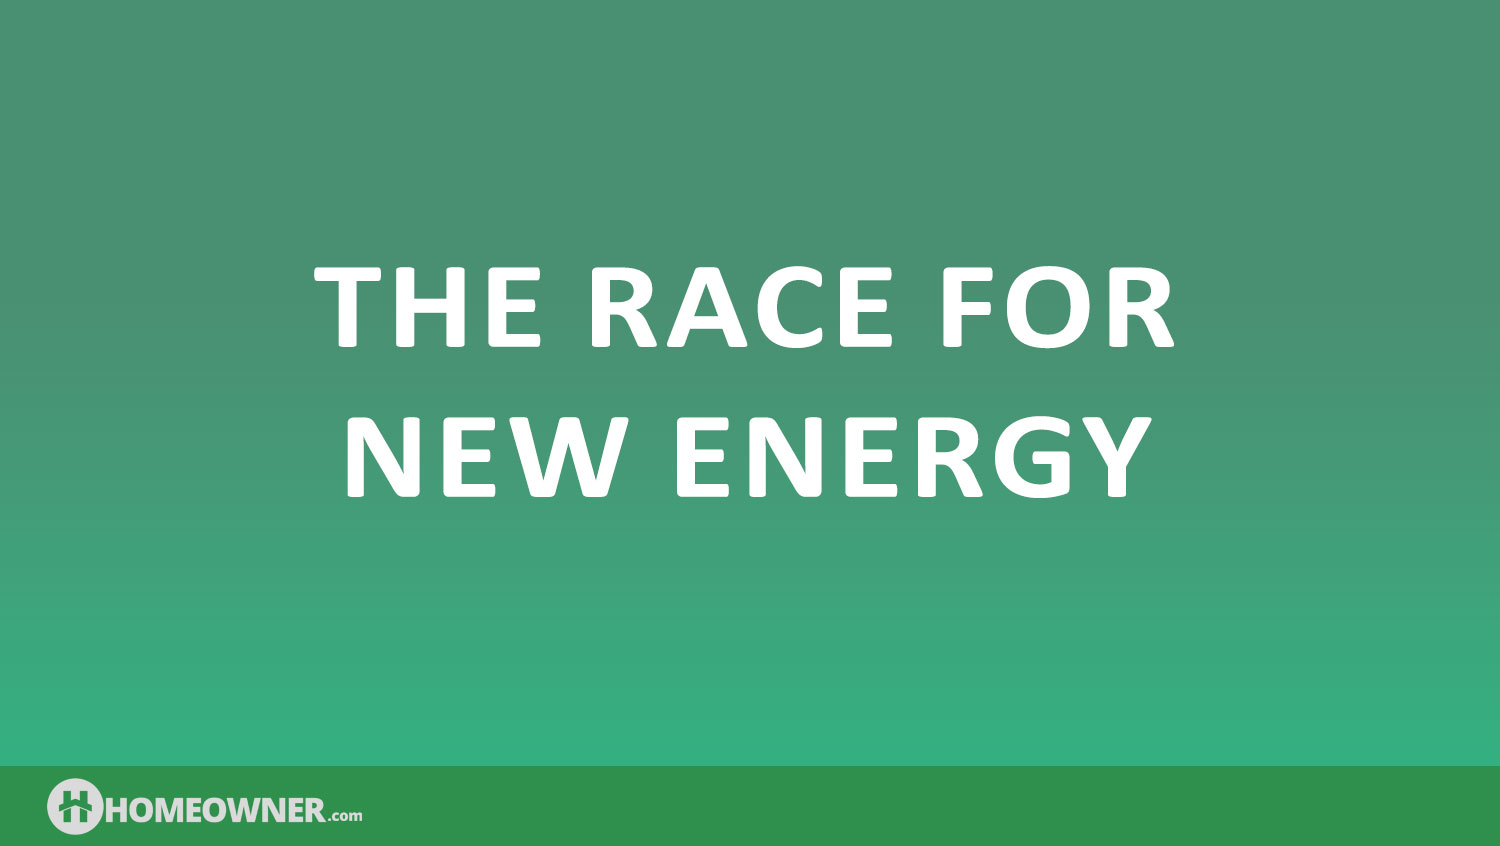 The Race for New Energy